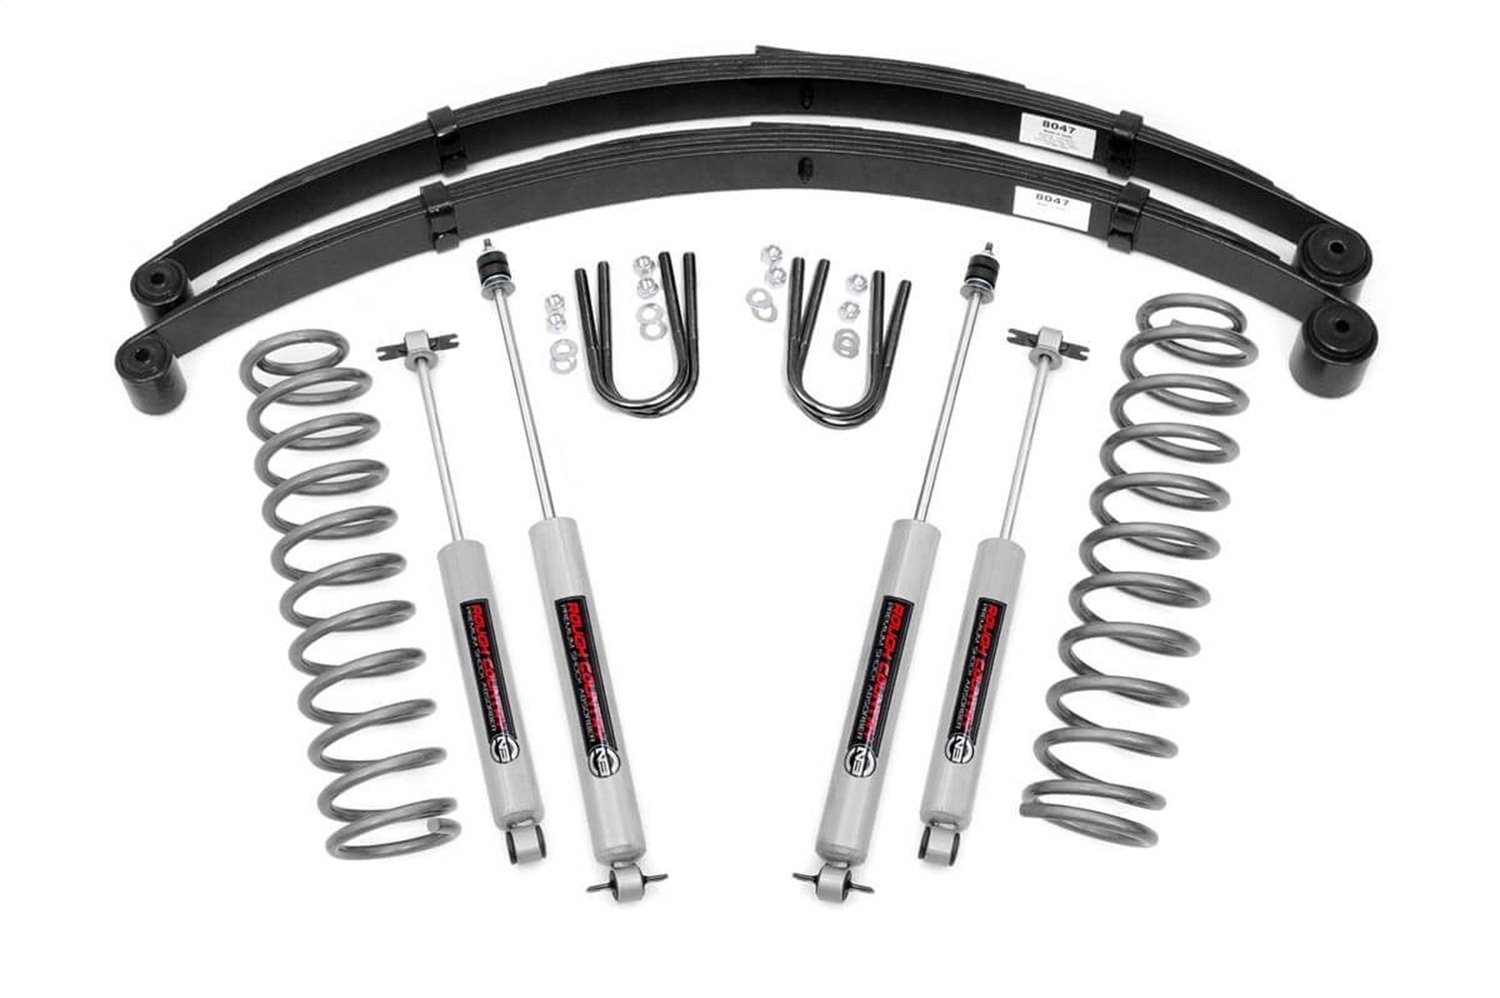 630N2 3-inch Suspension Lift System